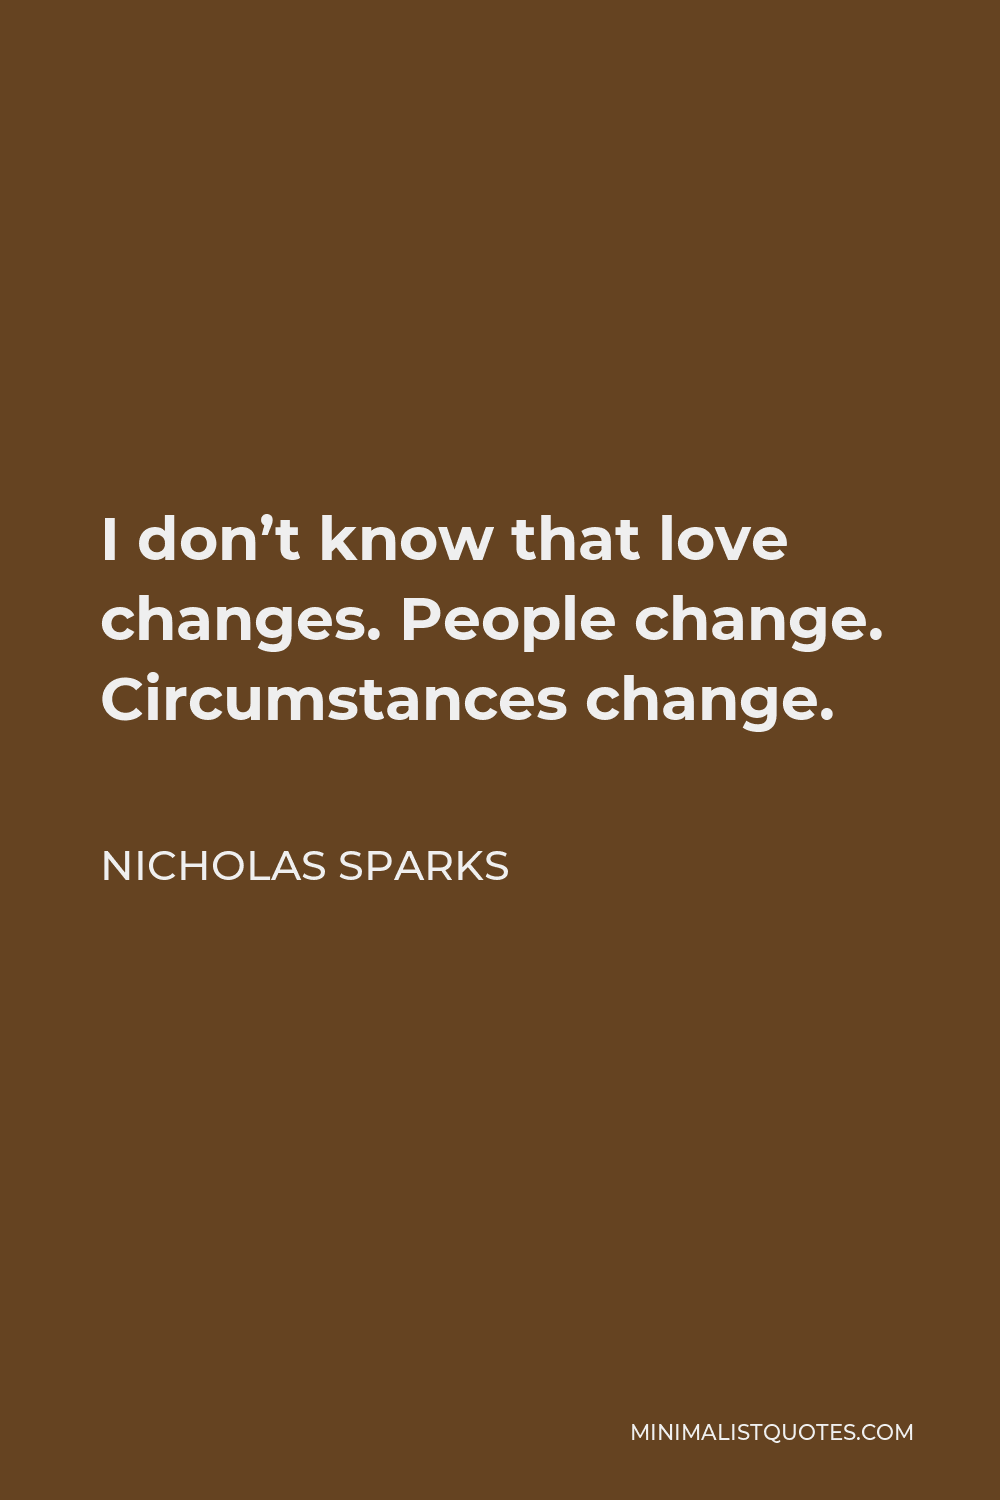 Nicholas Sparks Quote - I don’t know that love changes. People change. Circumstances change.